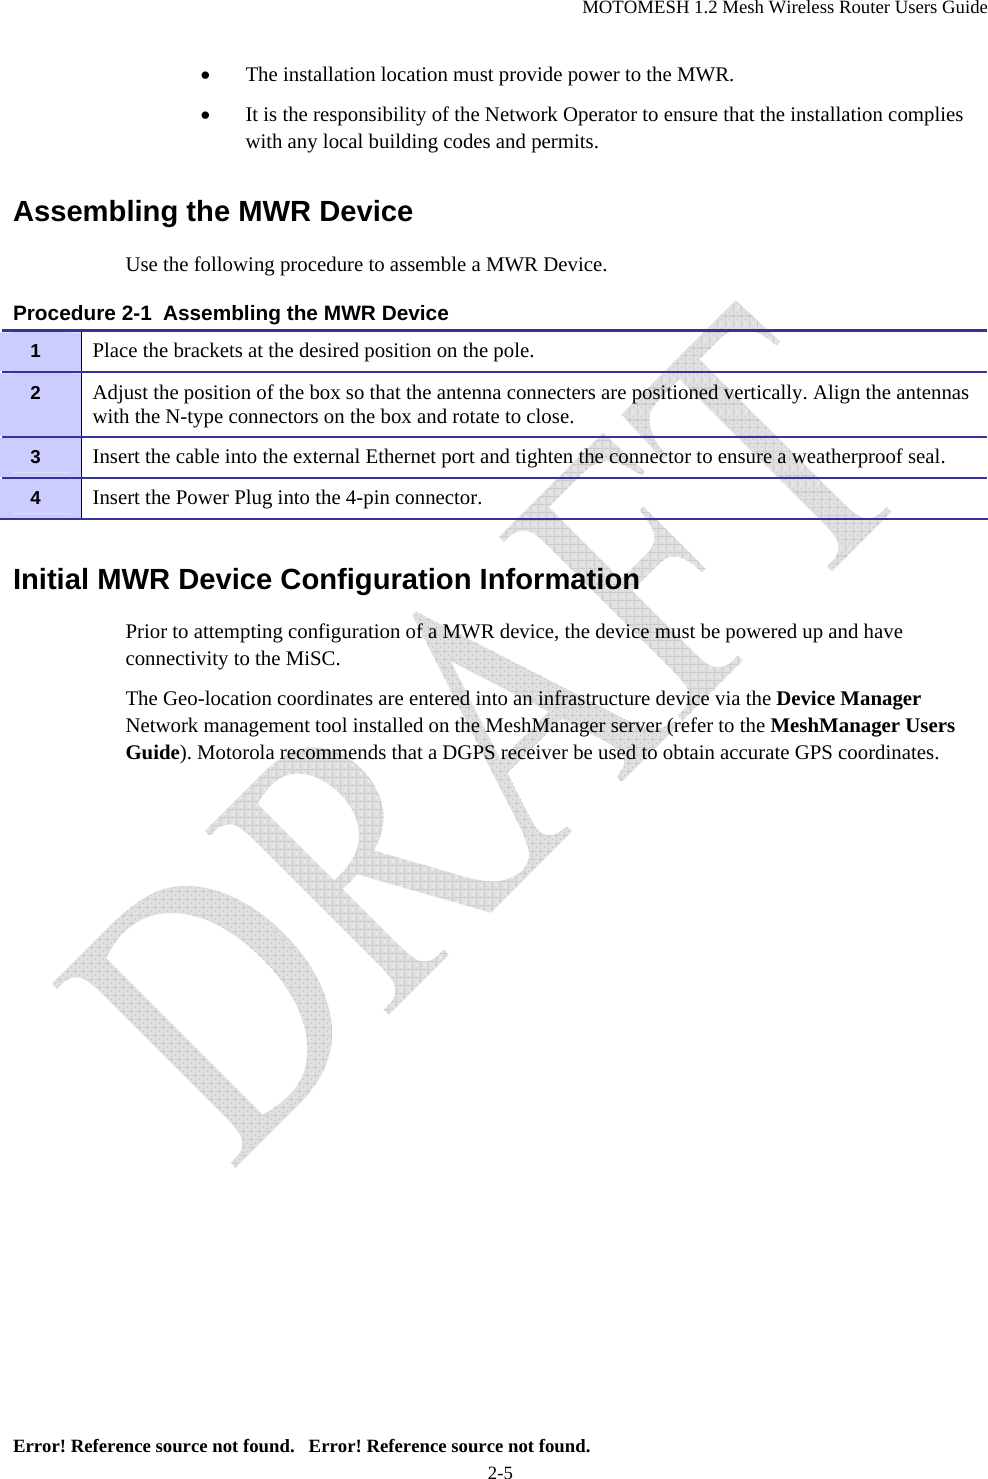 MOTOMESH 1.2 Mesh Wireless Router Users Guide Error! Reference source not found.   Error! Reference source not found. 2-5 • The installation location must provide power to the MWR. • It is the responsibility of the Network Operator to ensure that the installation complies with any local building codes and permits. Assembling the MWR Device Use the following procedure to assemble a MWR Device. Procedure 2-1  Assembling the MWR Device Initial MWR Device Configuration Information Prior to attempting configuration of a MWR device, the device must be powered up and have connectivity to the MiSC. The Geo-location coordinates are entered into an infrastructure device via the Device Manager Network management tool installed on the MeshManager server (refer to the MeshManager Users Guide). Motorola recommends that a DGPS receiver be used to obtain accurate GPS coordinates.1   Place the brackets at the desired position on the pole. 2   Adjust the position of the box so that the antenna connecters are positioned vertically. Align the antennas with the N-type connectors on the box and rotate to close. 3   Insert the cable into the external Ethernet port and tighten the connector to ensure a weatherproof seal. 4   Insert the Power Plug into the 4-pin connector. 